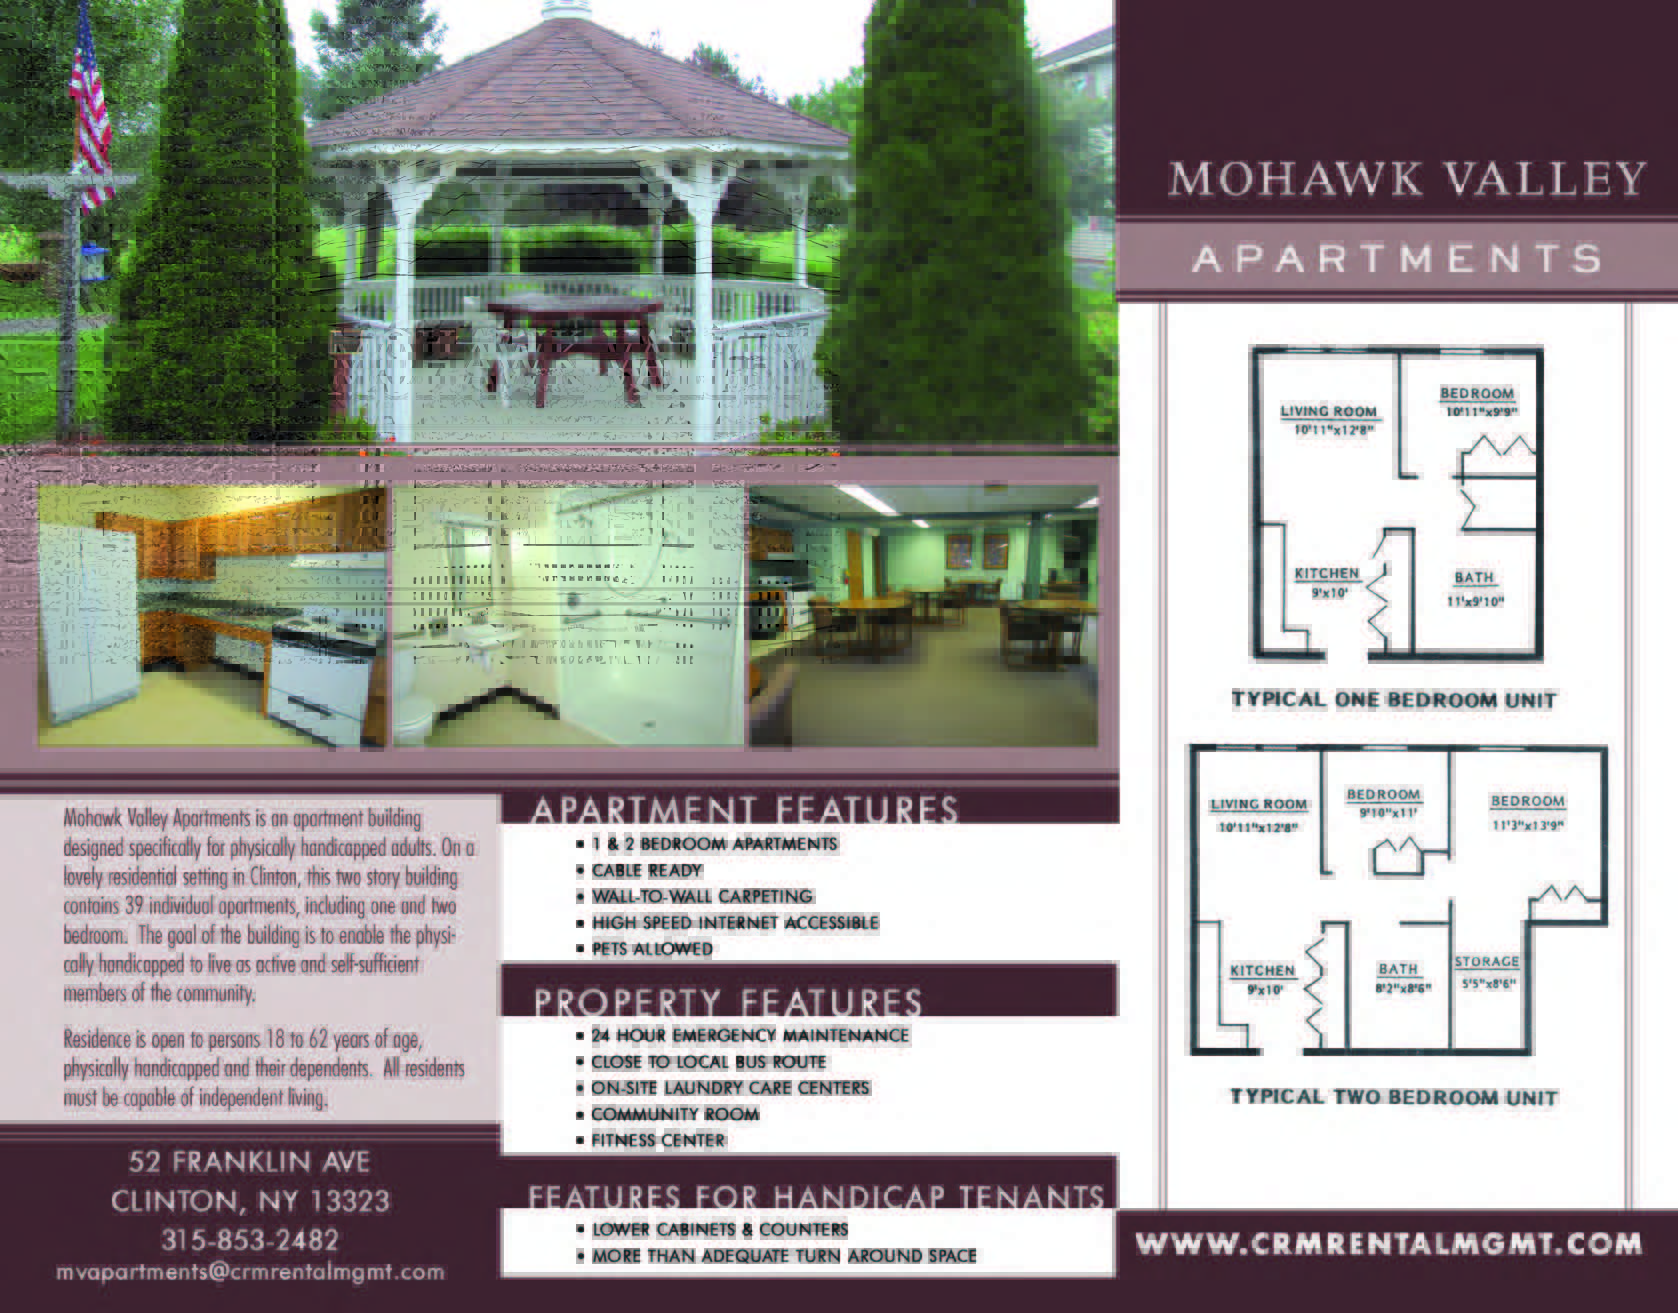 Mohawk Valley Brochure Page 2 of 2